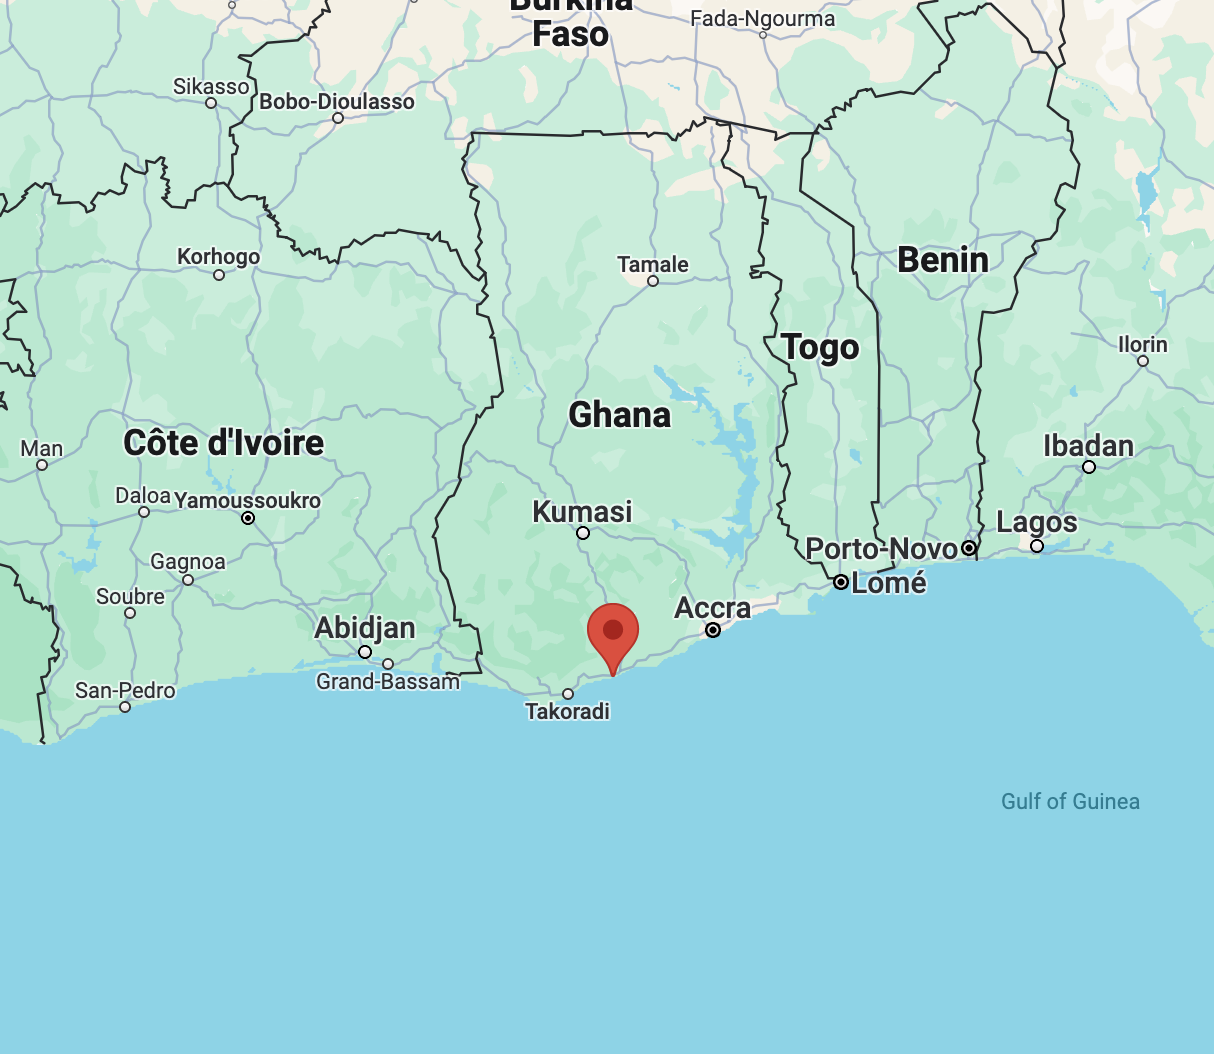 The location of Cape Coast in relation to the country of Ghana. The city lies along the Atlantic Coast, relatively short distance from the capital of Accra.